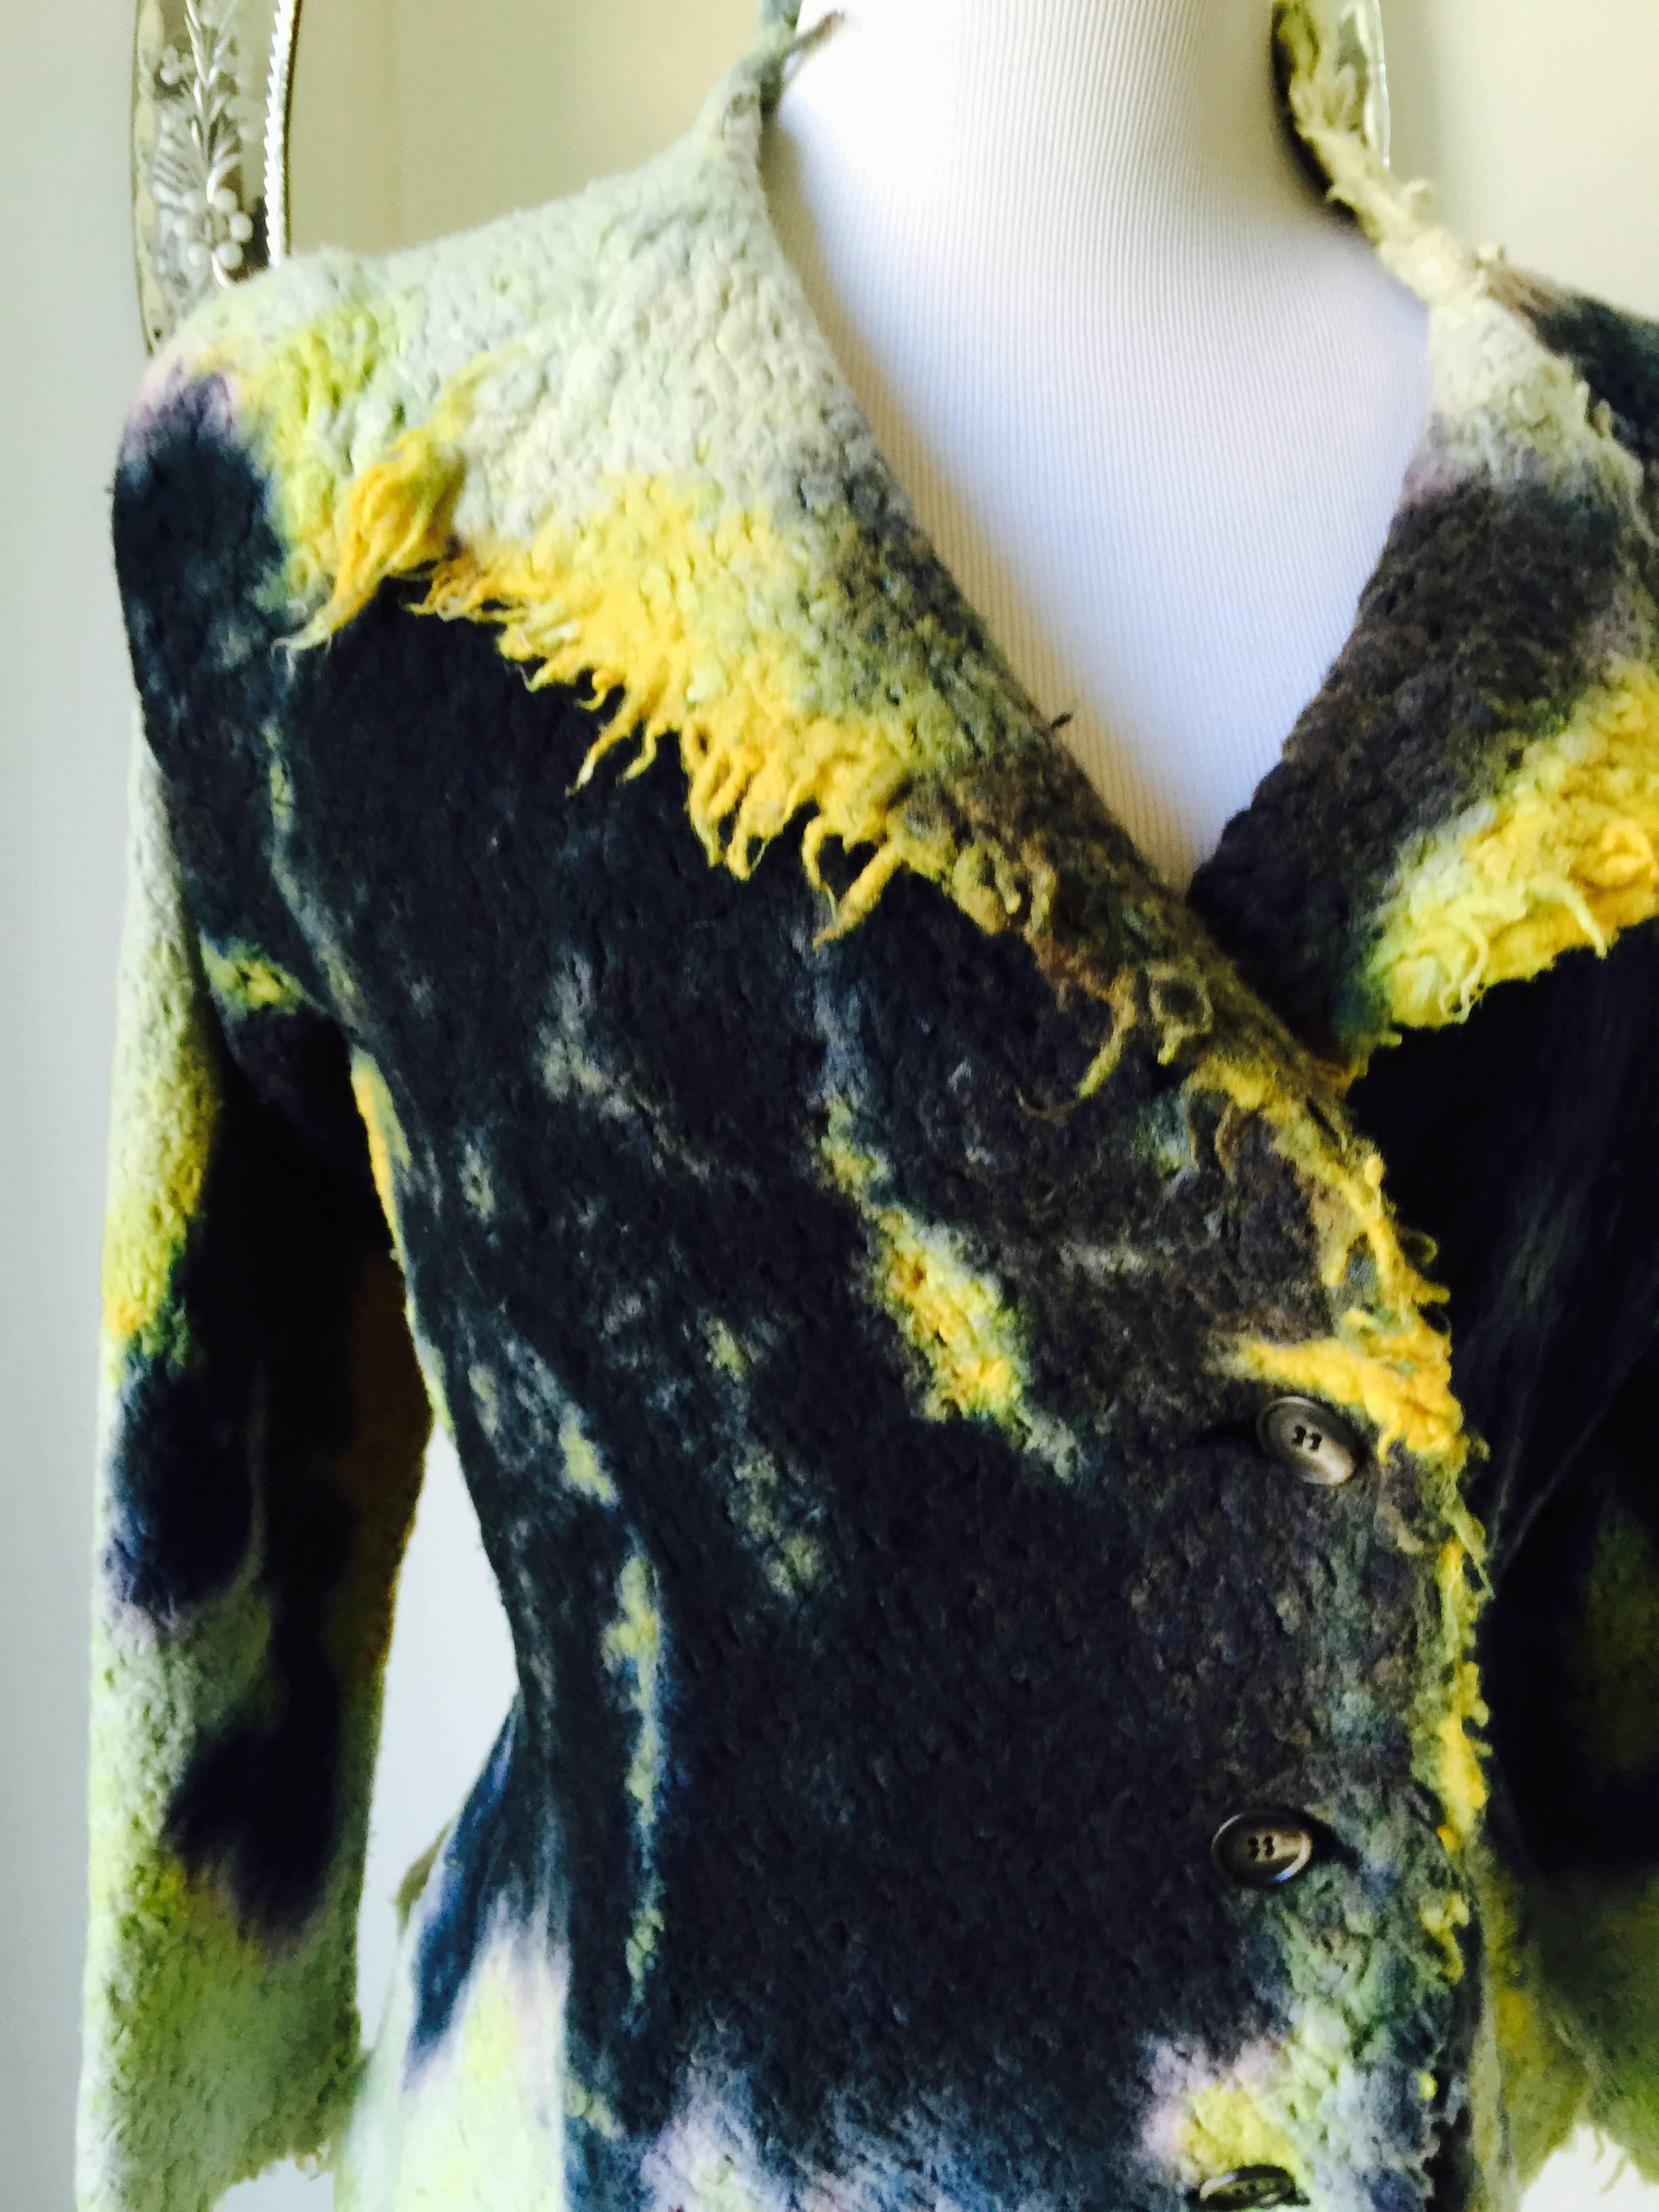 Yushiki Hishinuma is known for producing uniquely shaped clothing and integrating technology into traditional japanese tie dye designs.
An amazing piece by an amazing designer 
In boiled wool fit and flare style...unfinished hems...
make a